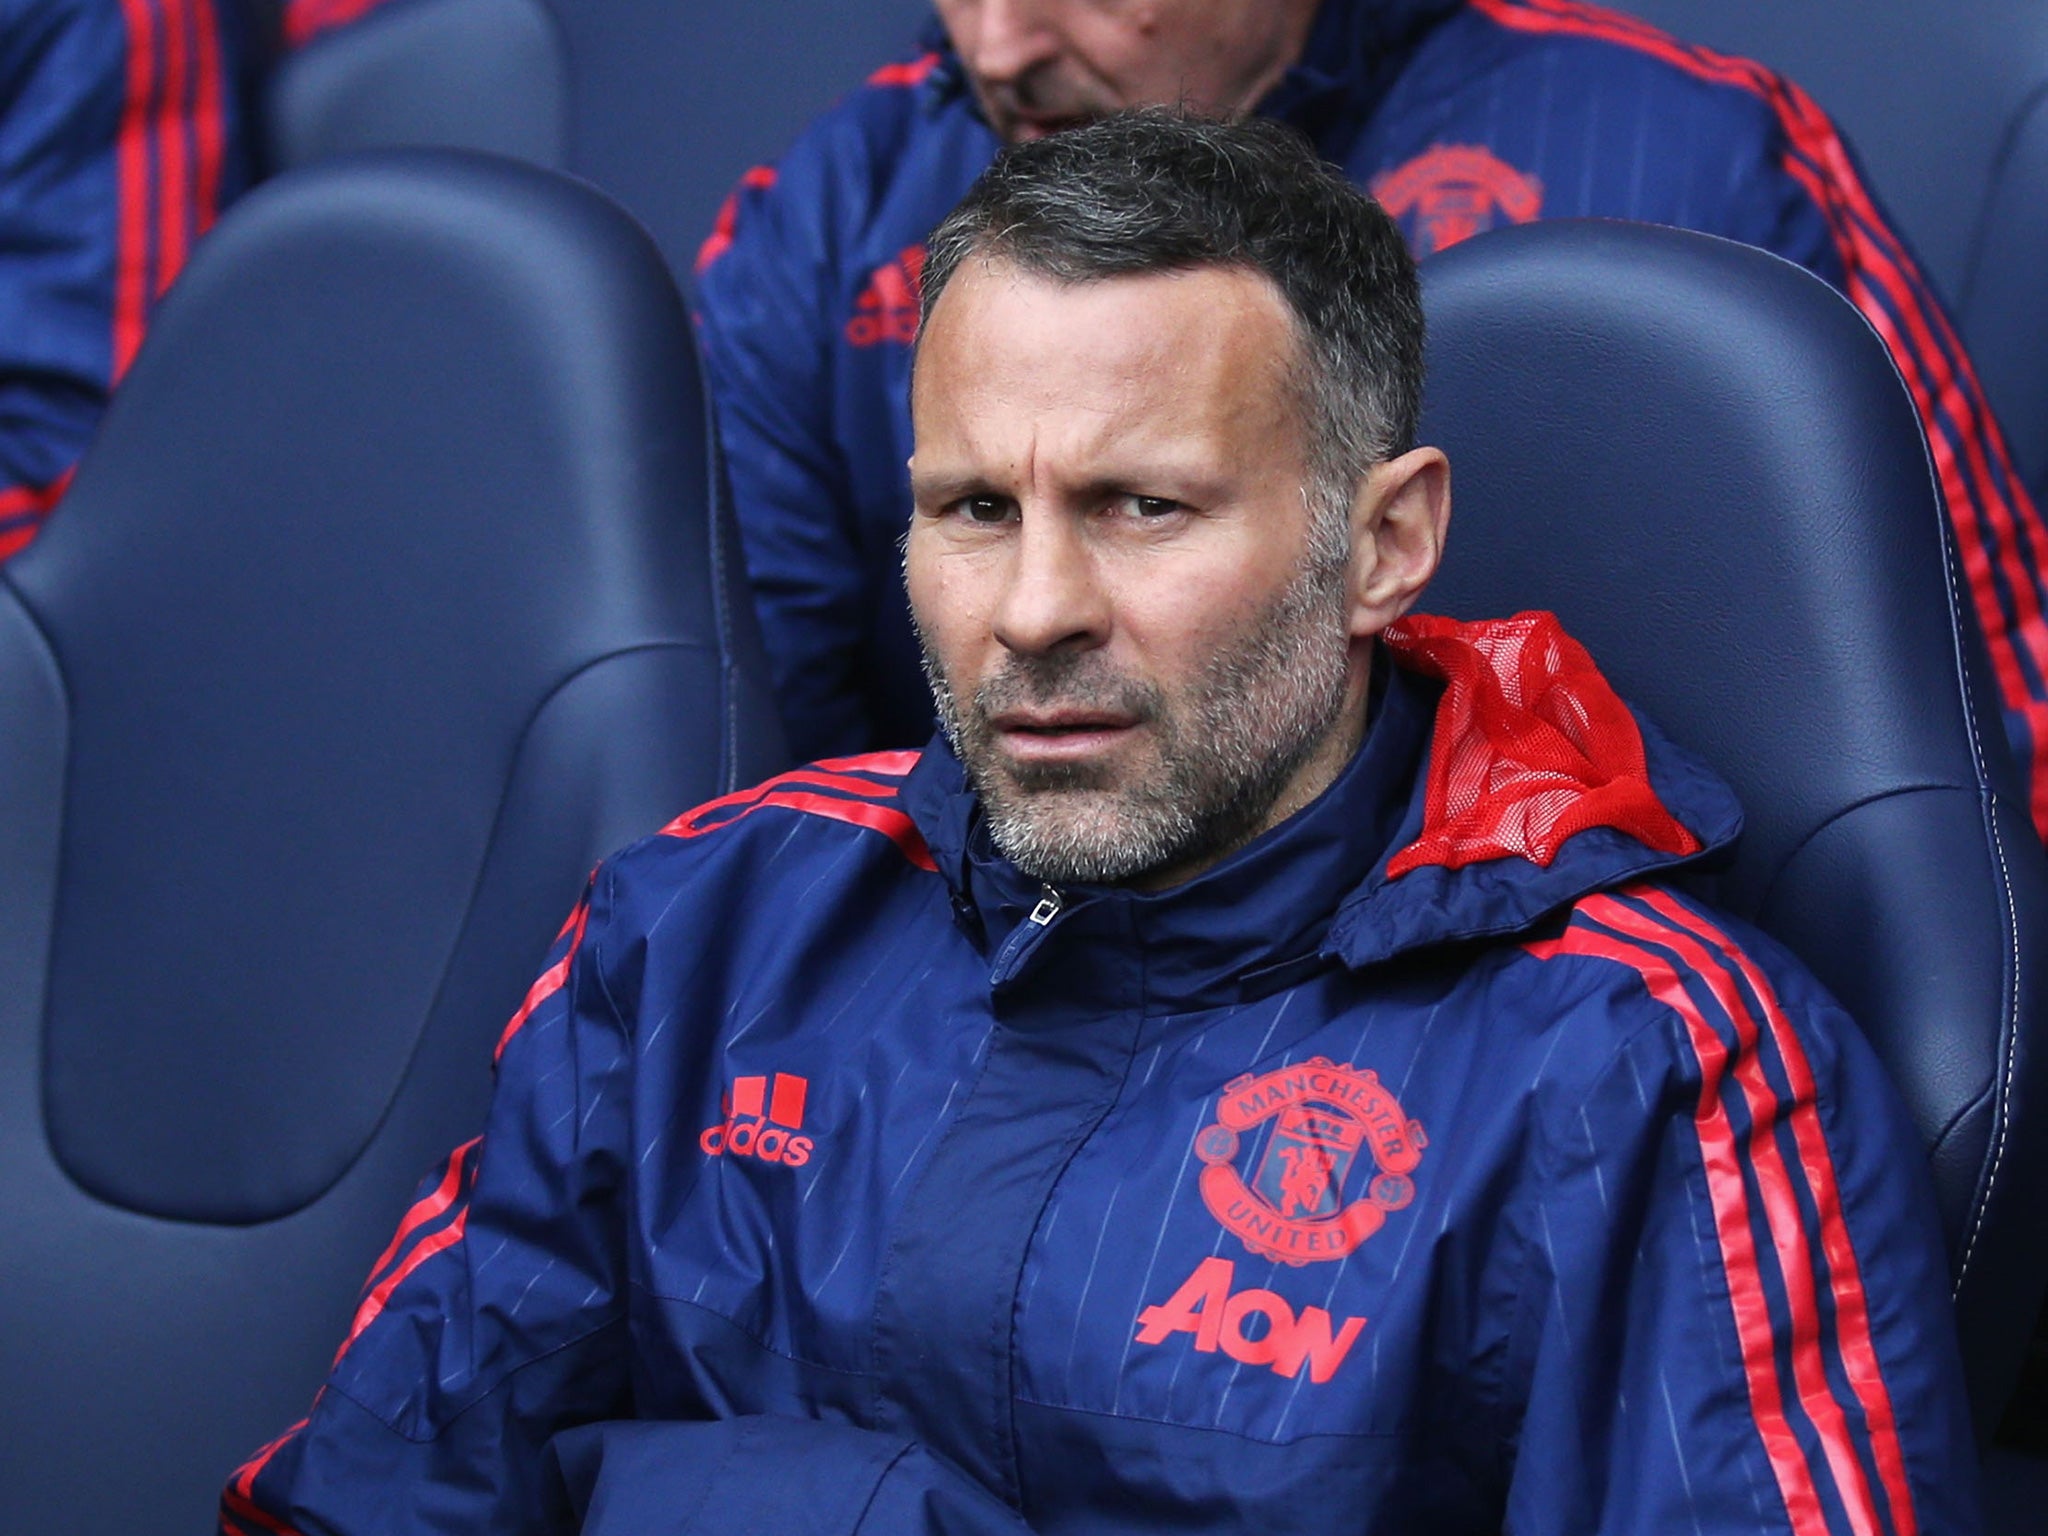 Giggs became the club's assistant manager following Van Gaal's appointment in 2014